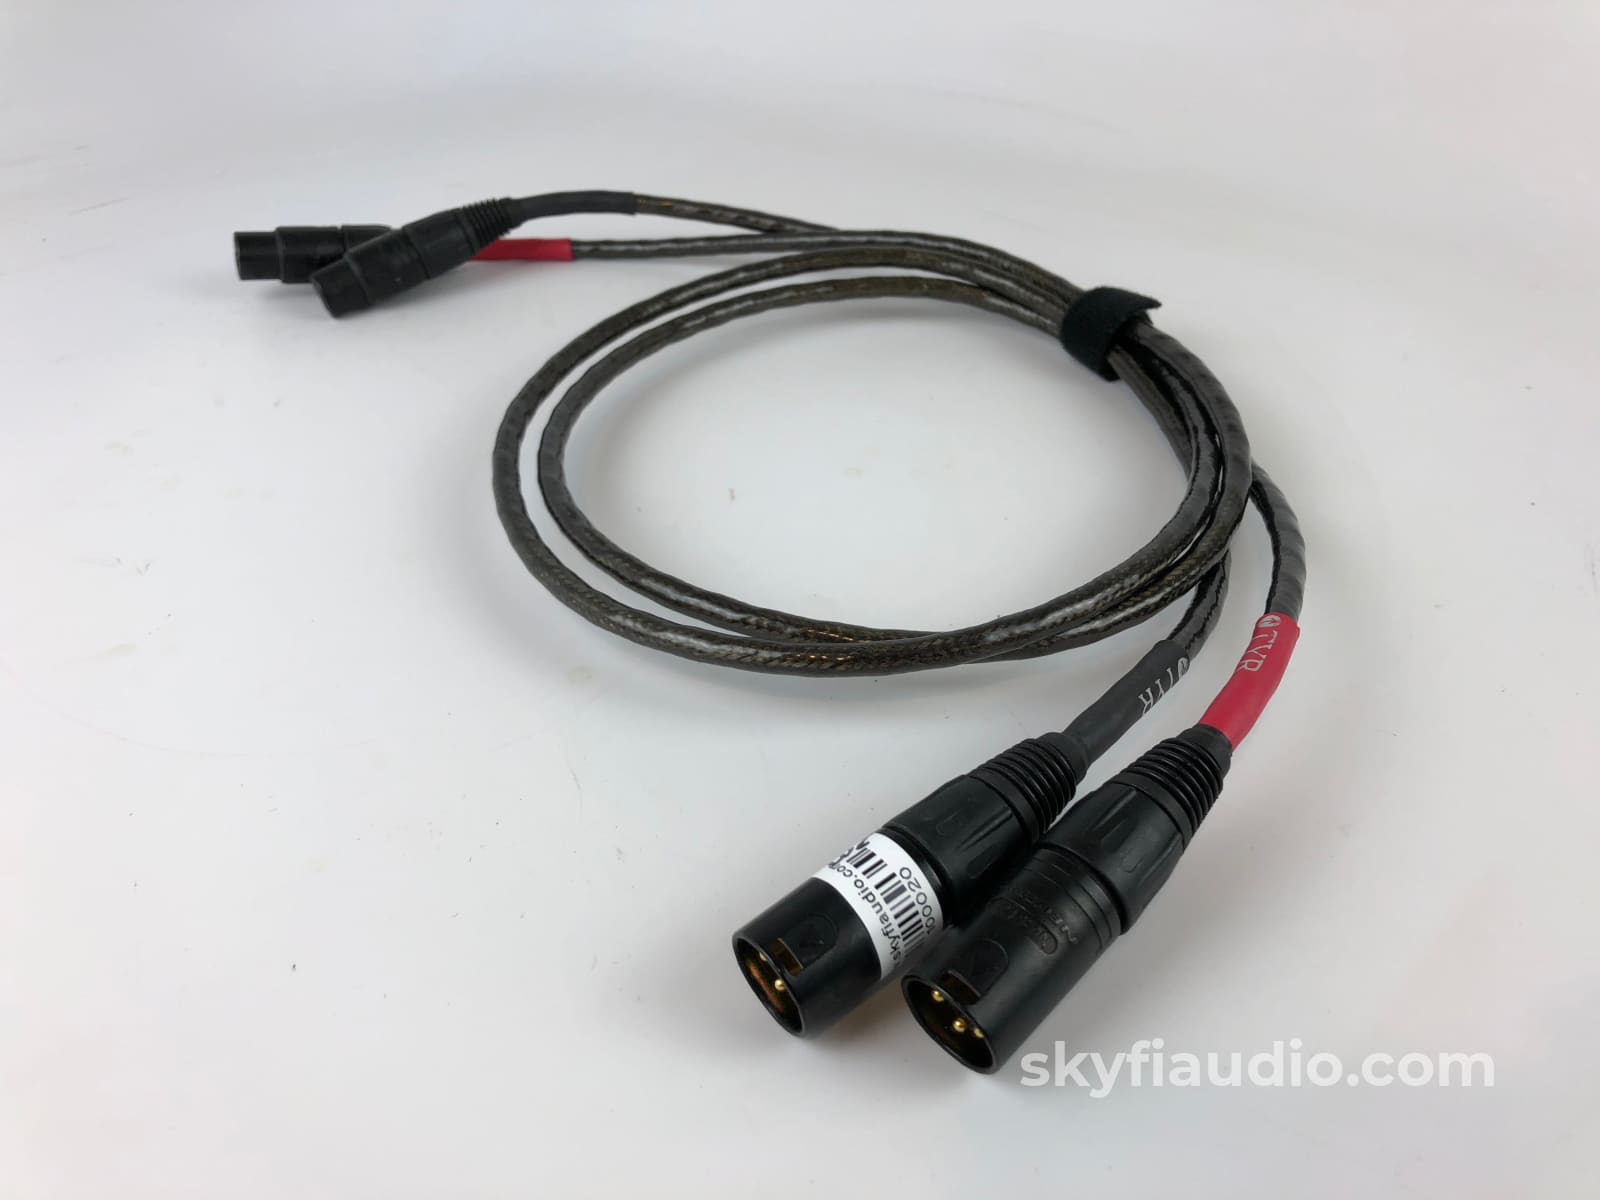 Nordost Tyr Xlr Cables - 1M